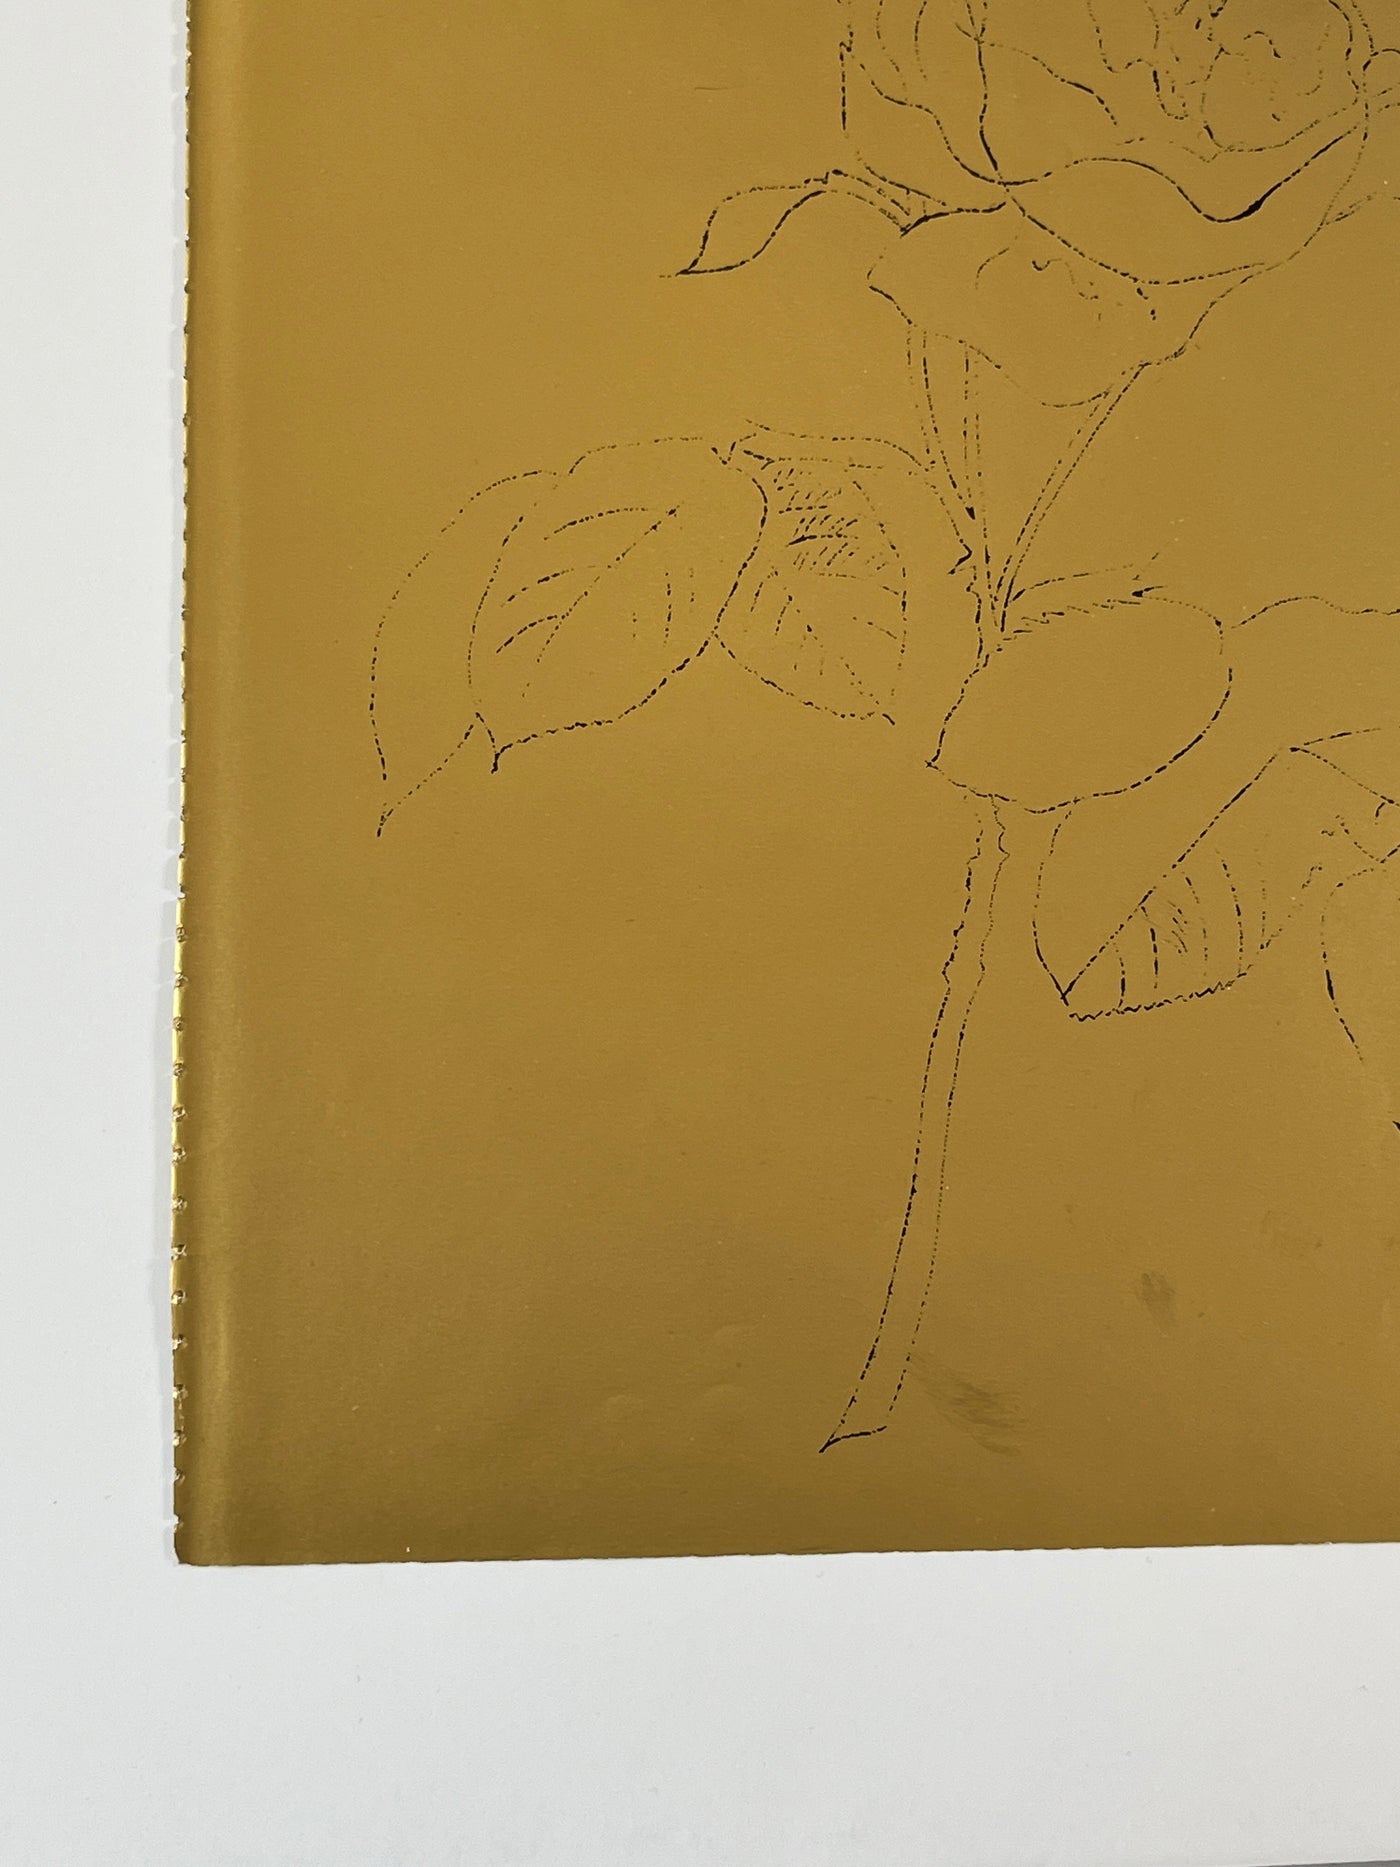 Andy Warhol, 'A Gold Book IV.122', 1957